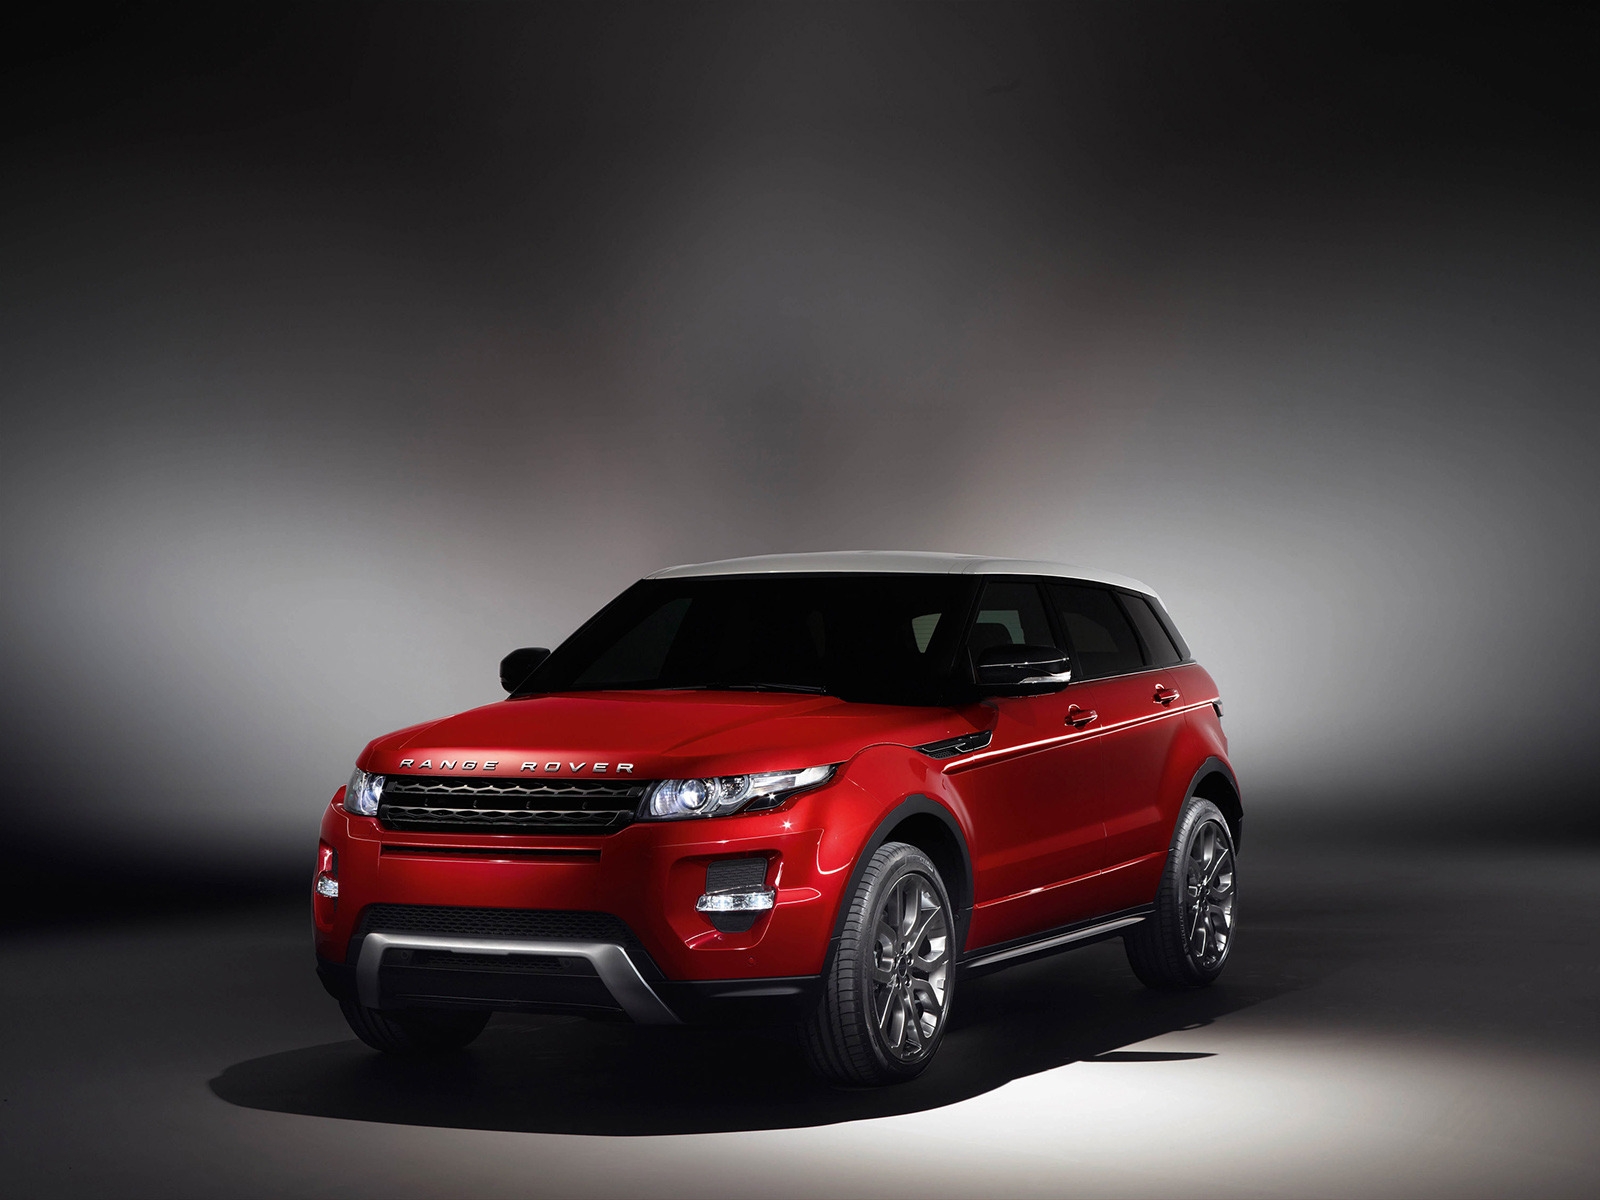 2012 Range Rover Evoque Red for 1600 x 1200 resolution